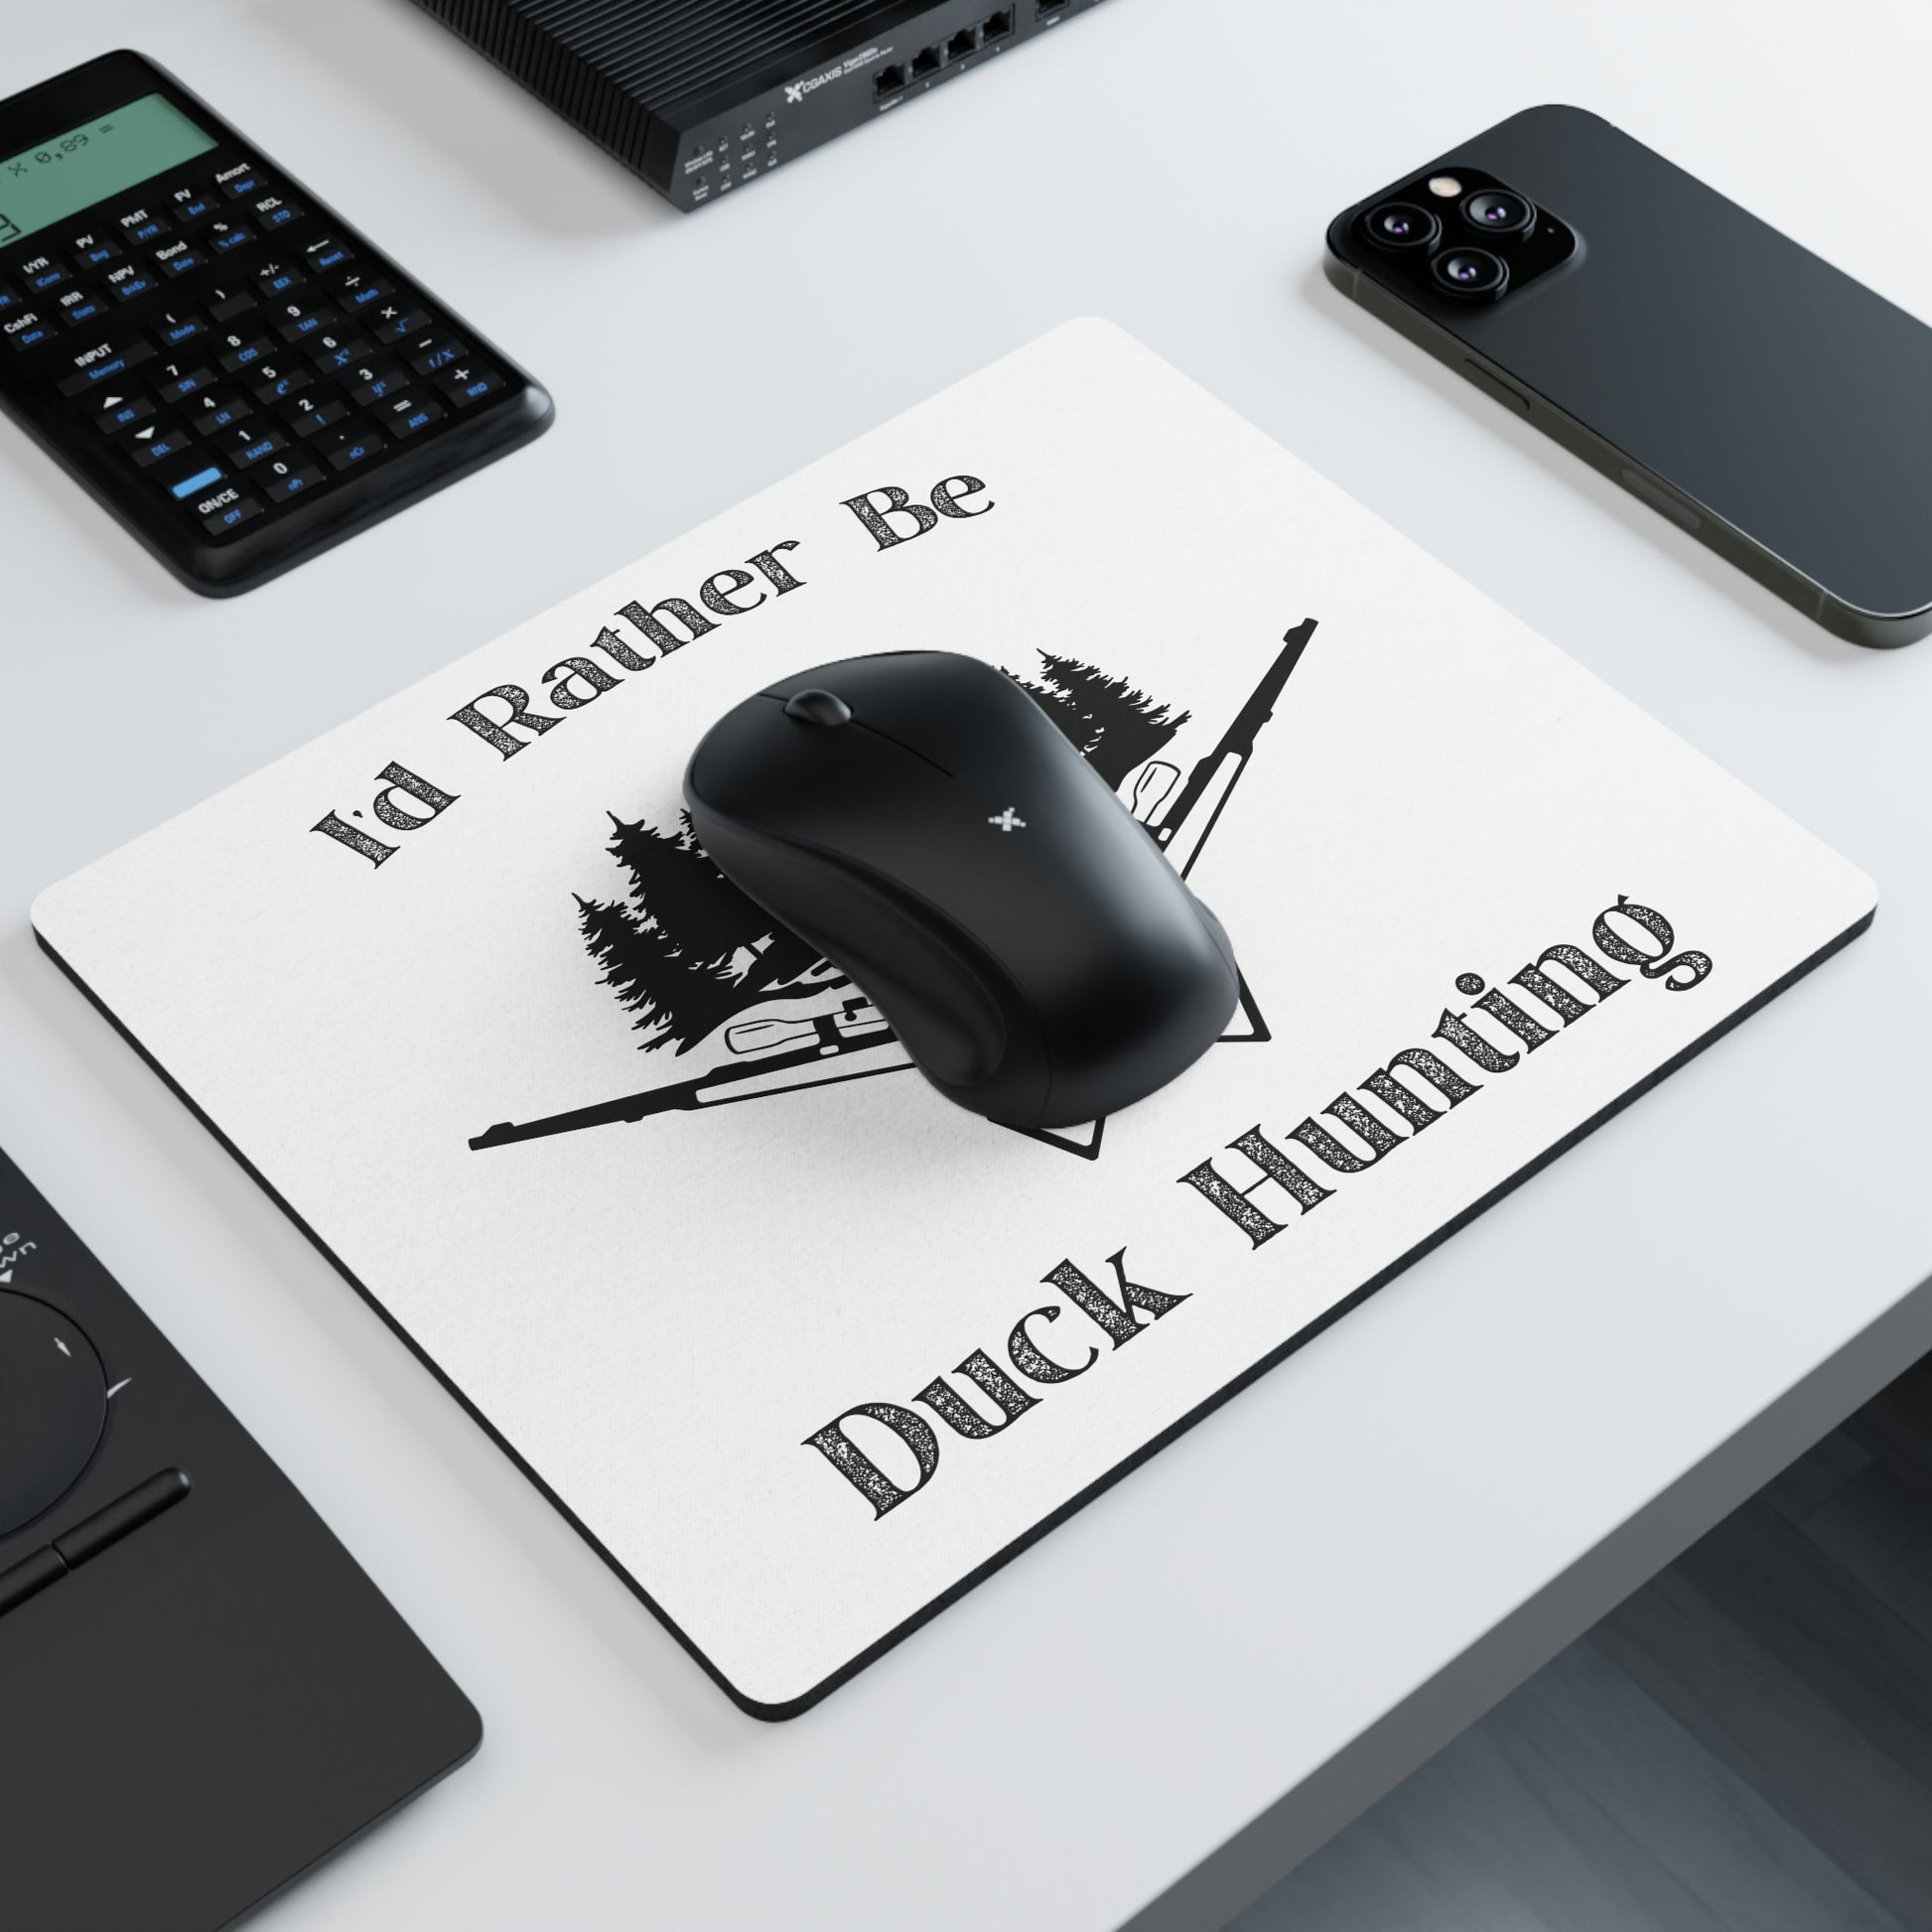 "I’d Rather Be Duck Hunting" Mouse Pad - Weave Got Gifts - Unique Gifts You Won’t Find Anywhere Else!